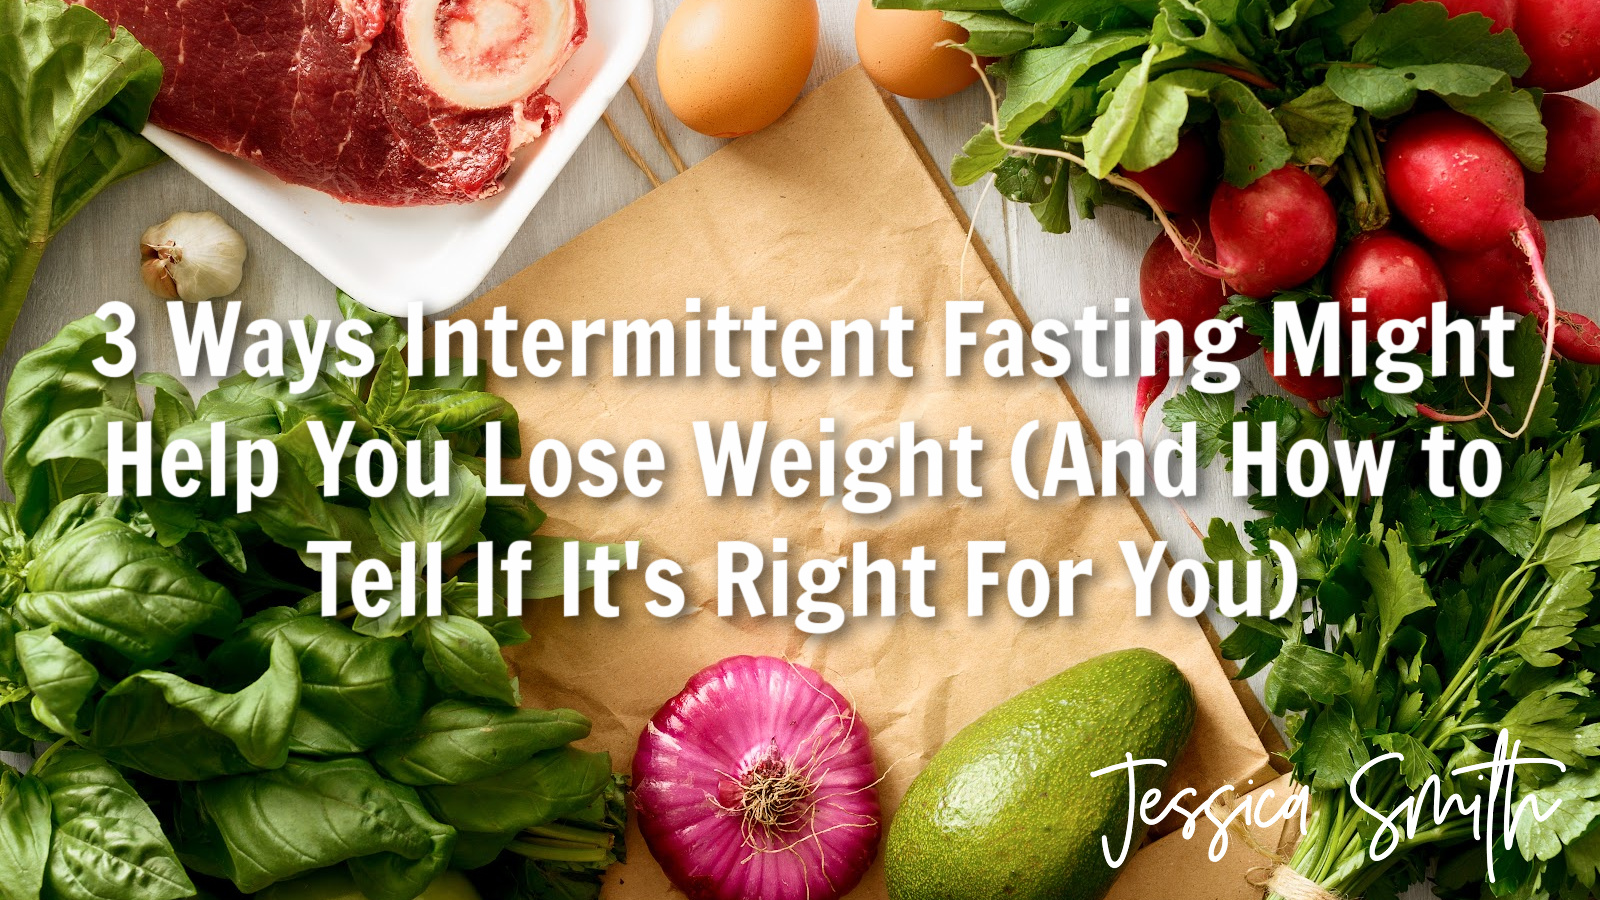 3 Ways Intermittent Fasting Might Help You Lose Weight (And How to Tell if It’s Right for You)